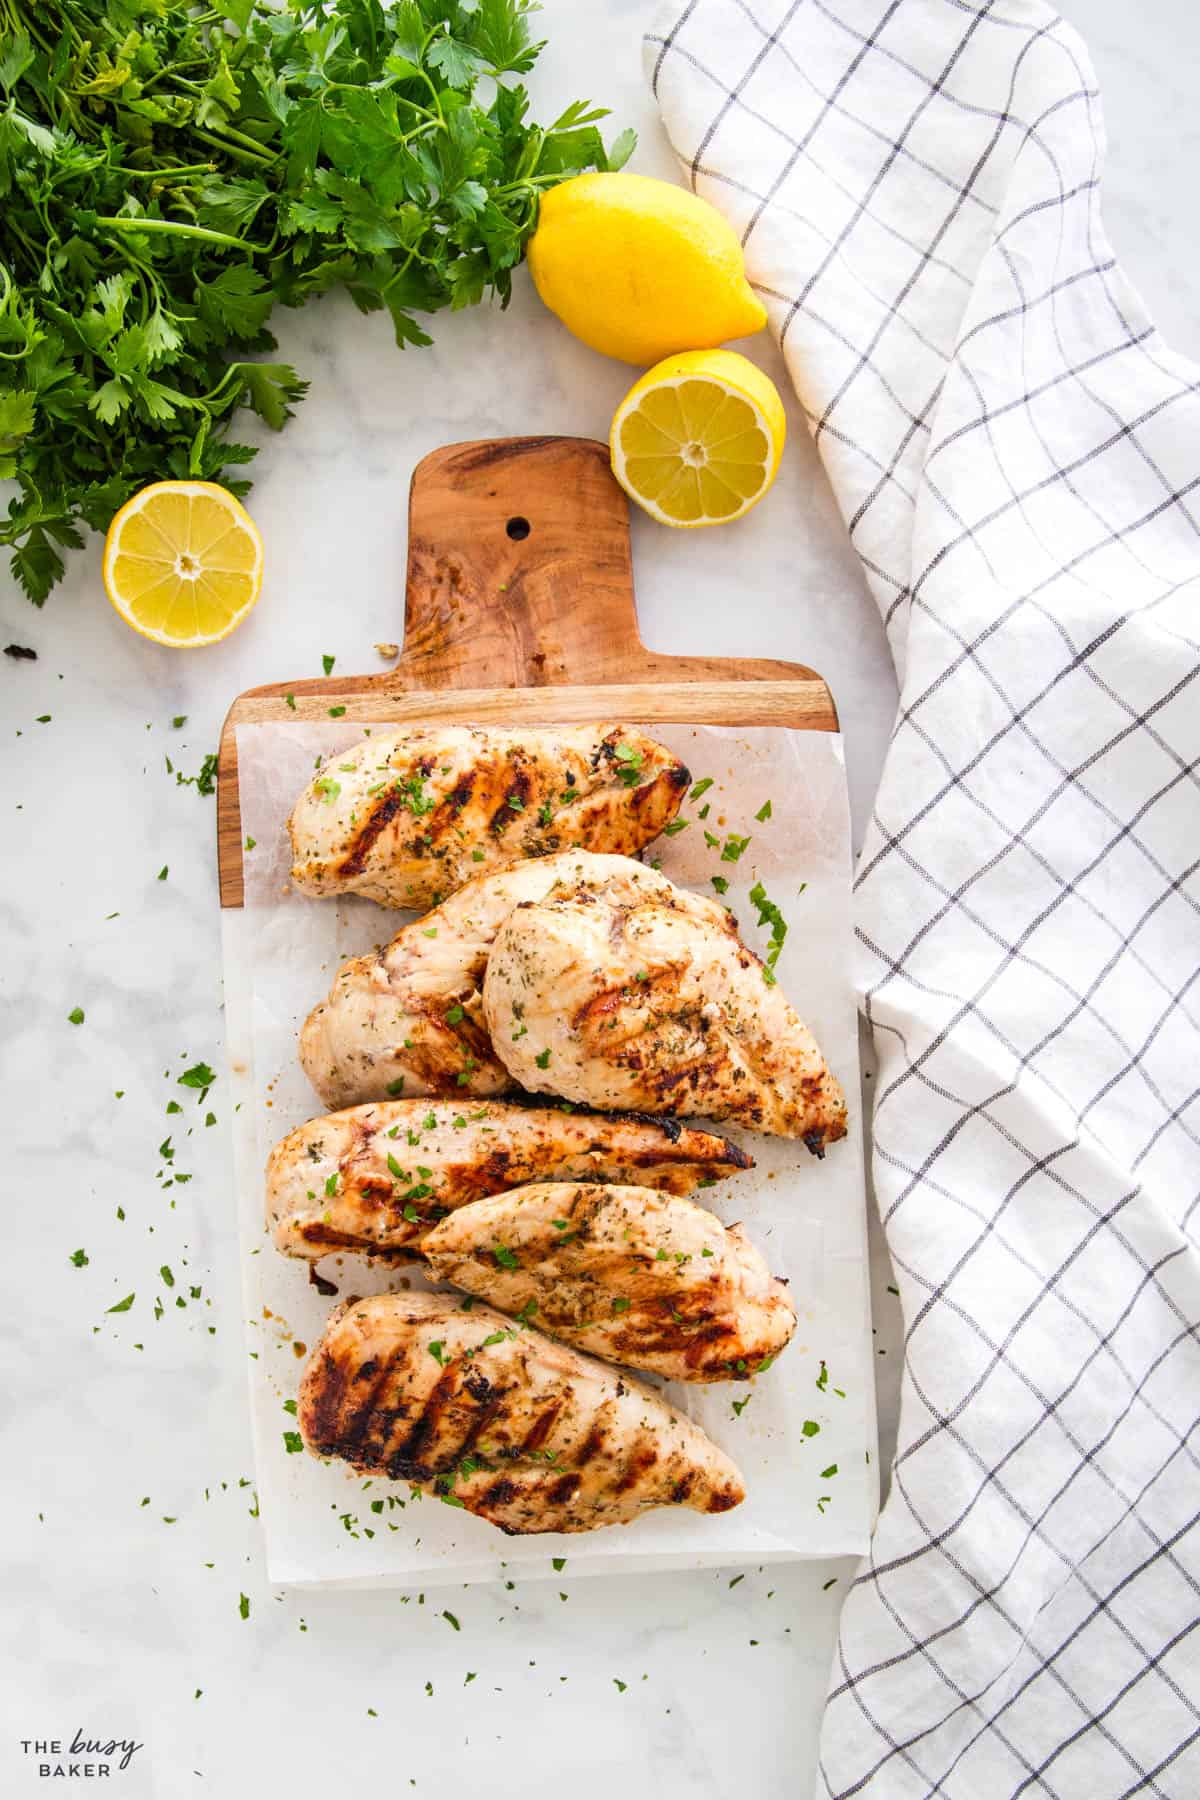 6 chicken breasts with grill marks